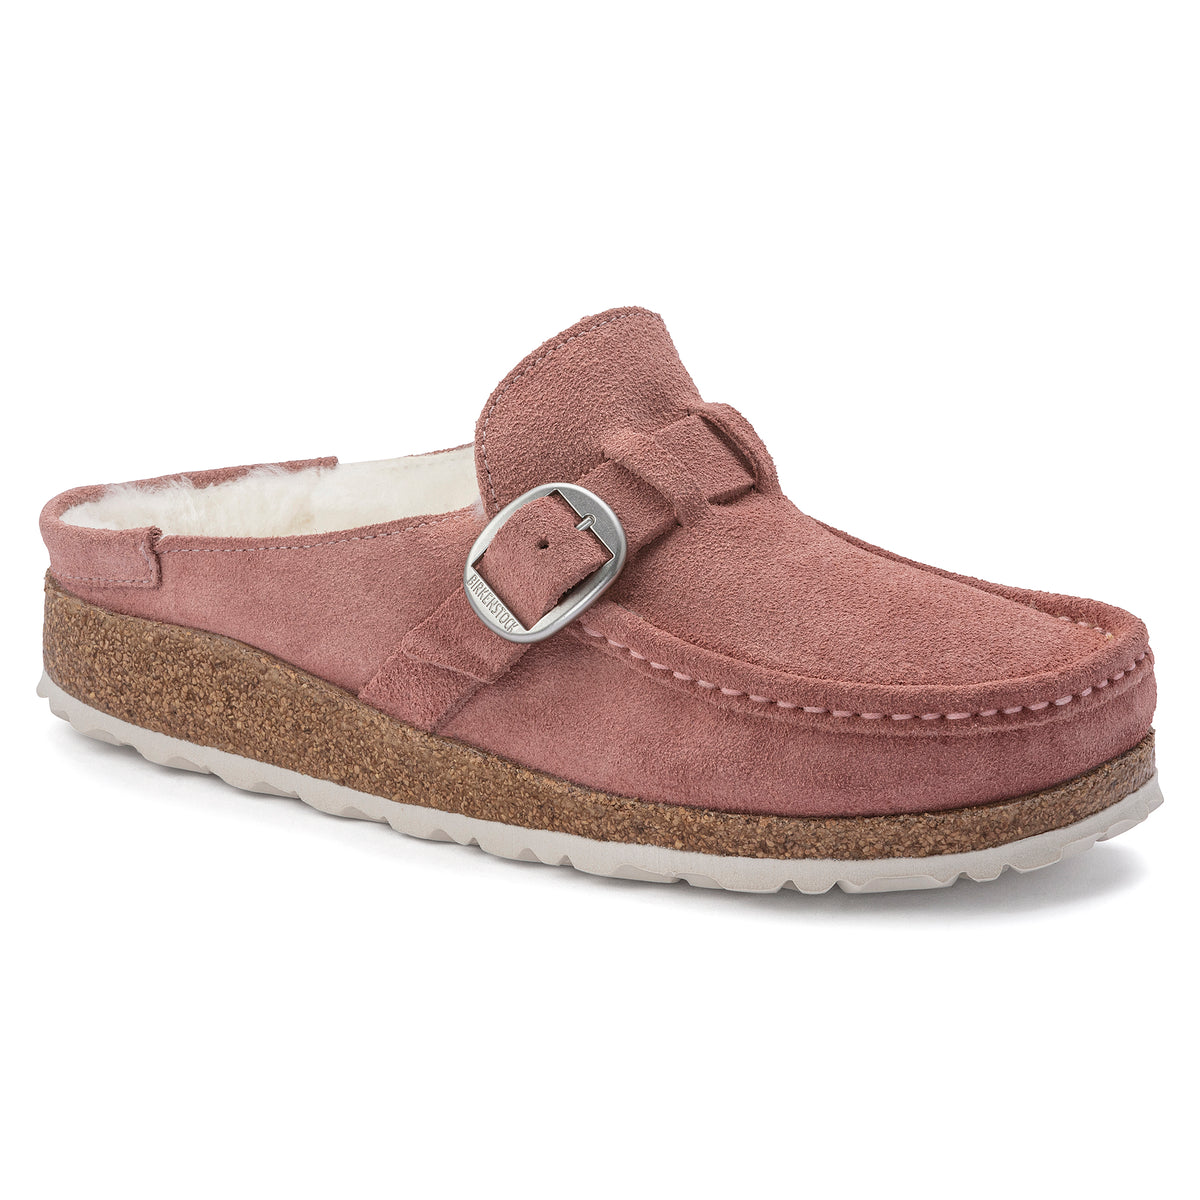 Birkenstock Limited Edition Buckley pink clay suede/natural shearling